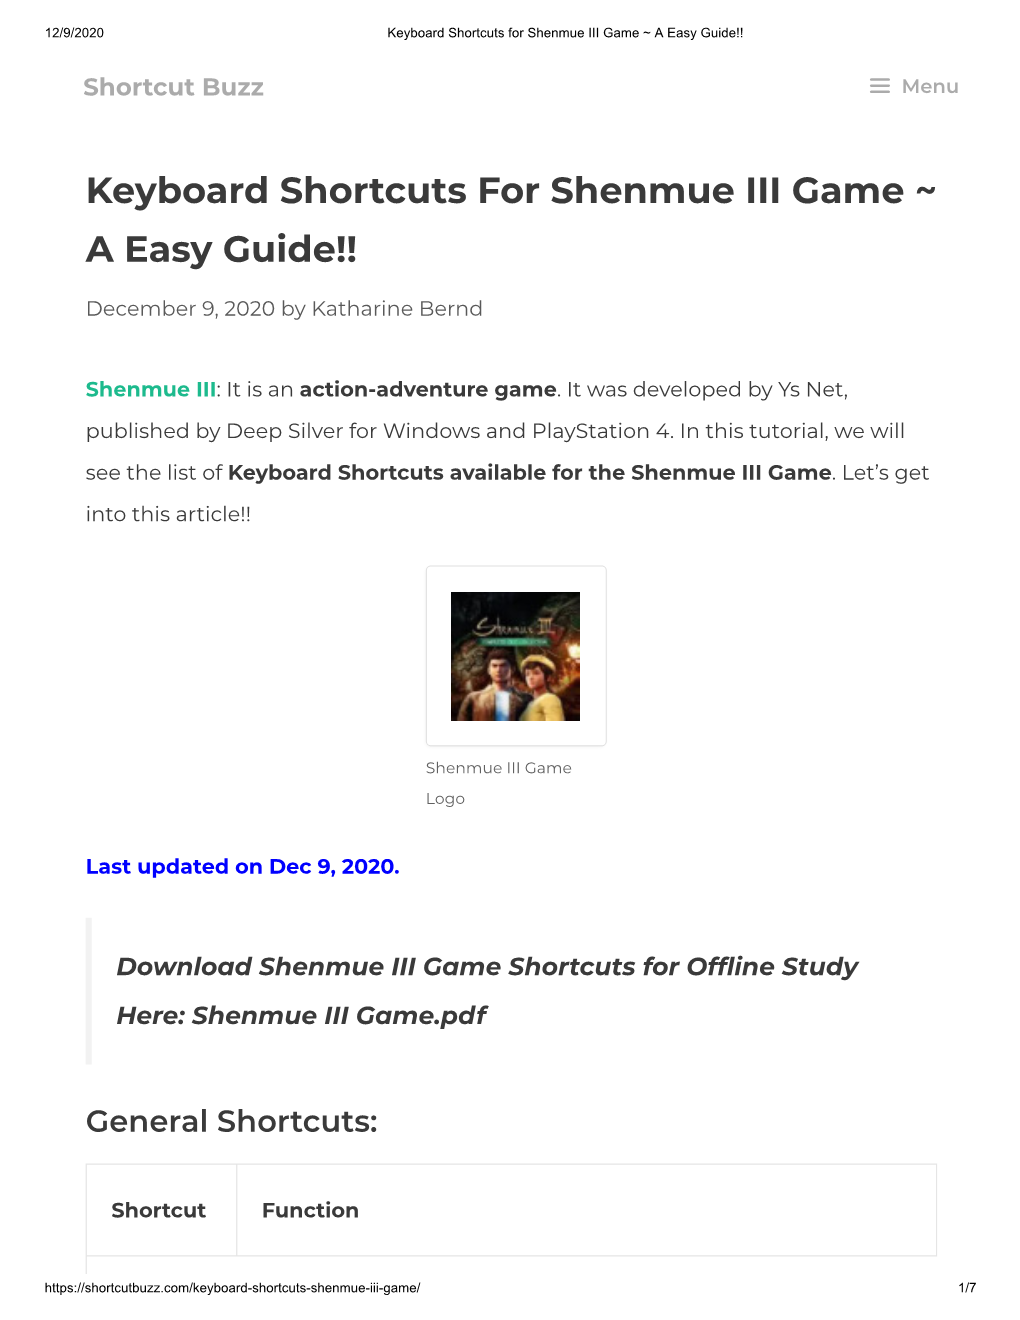 Keyboard Shortcuts for Shenmue III Game ~ a Easy Guide!!